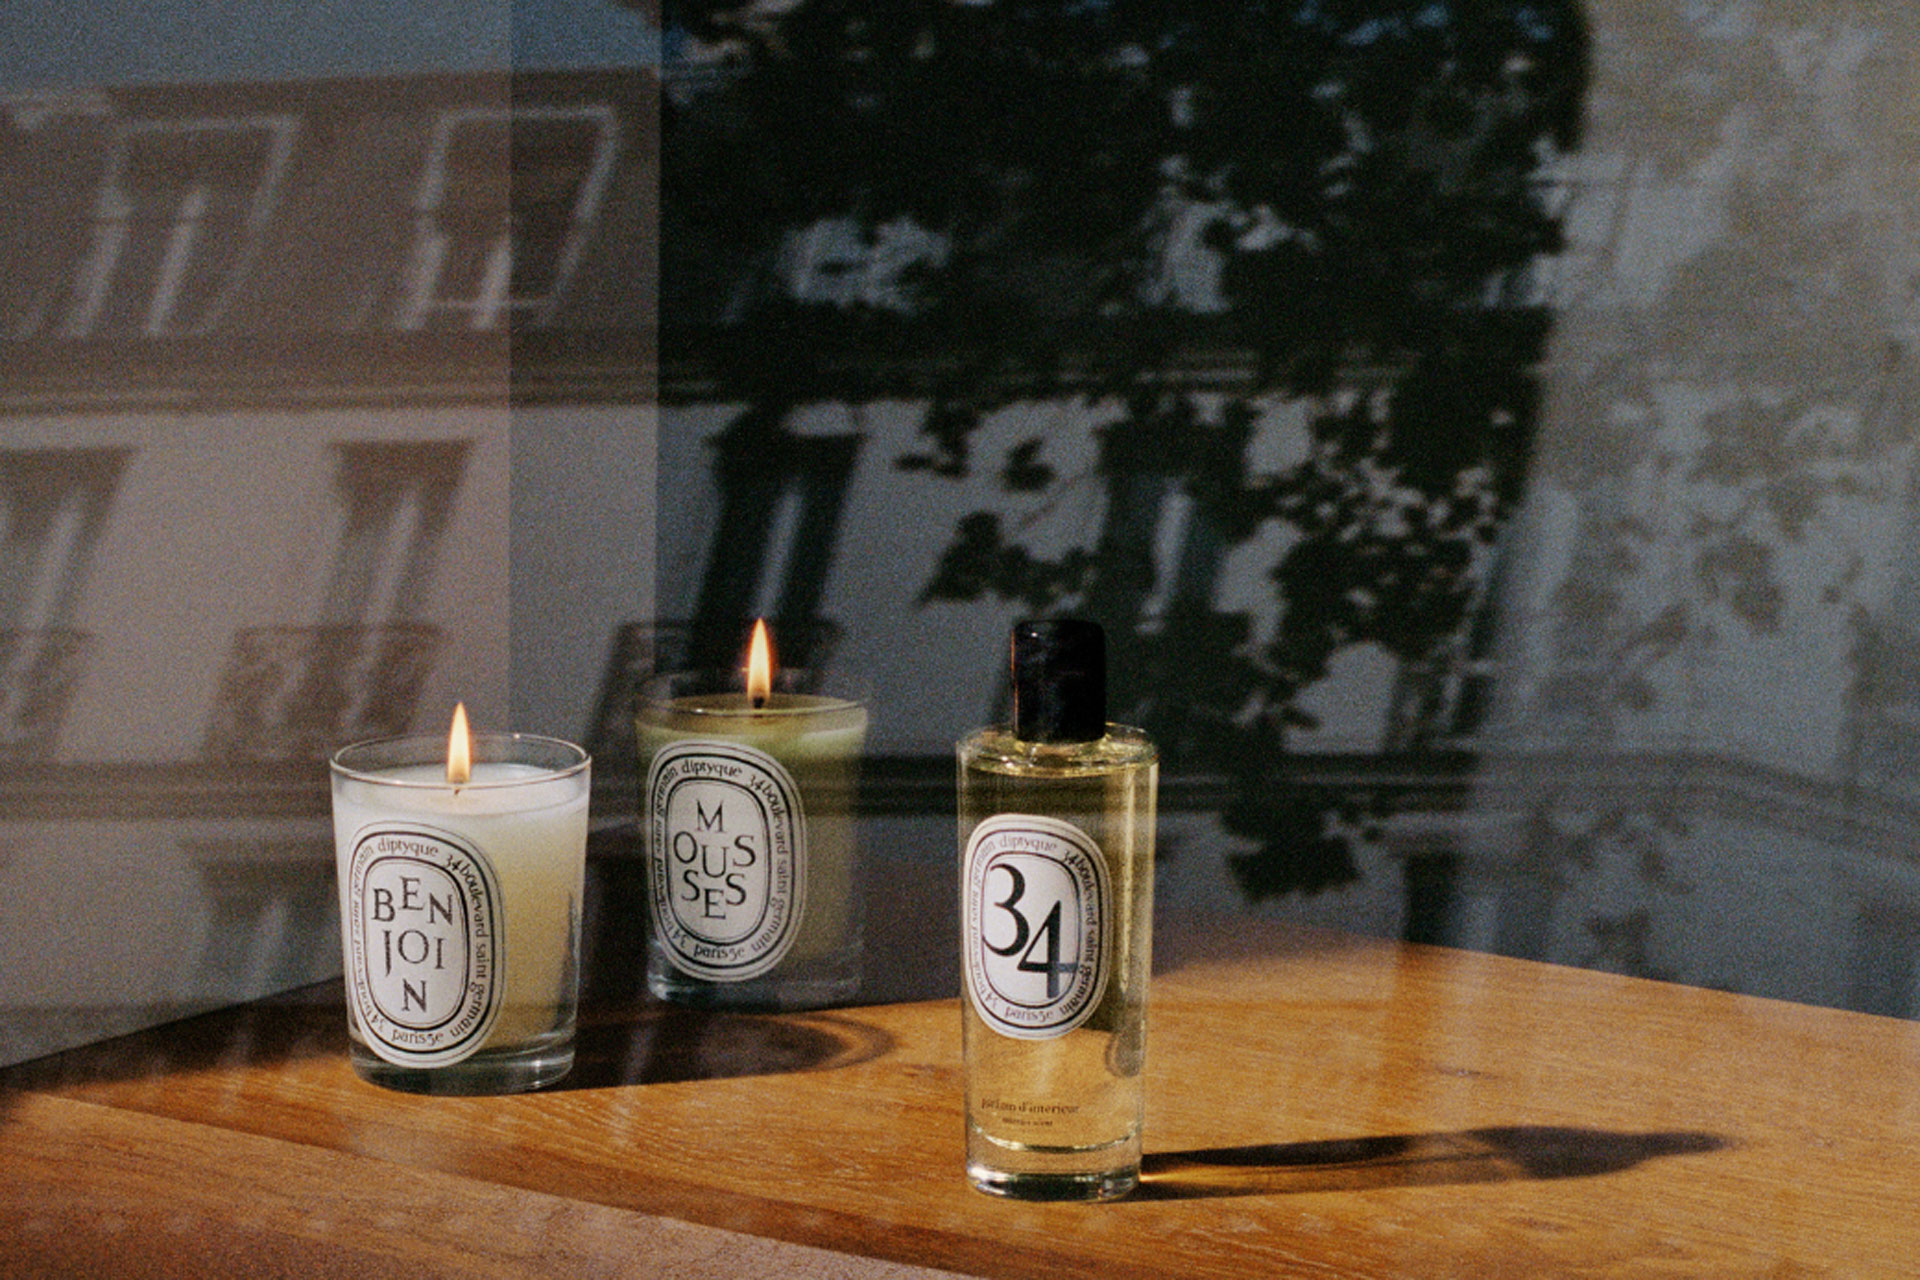 Diptyque candles from the 34 Boulevard Saint Germain Collection